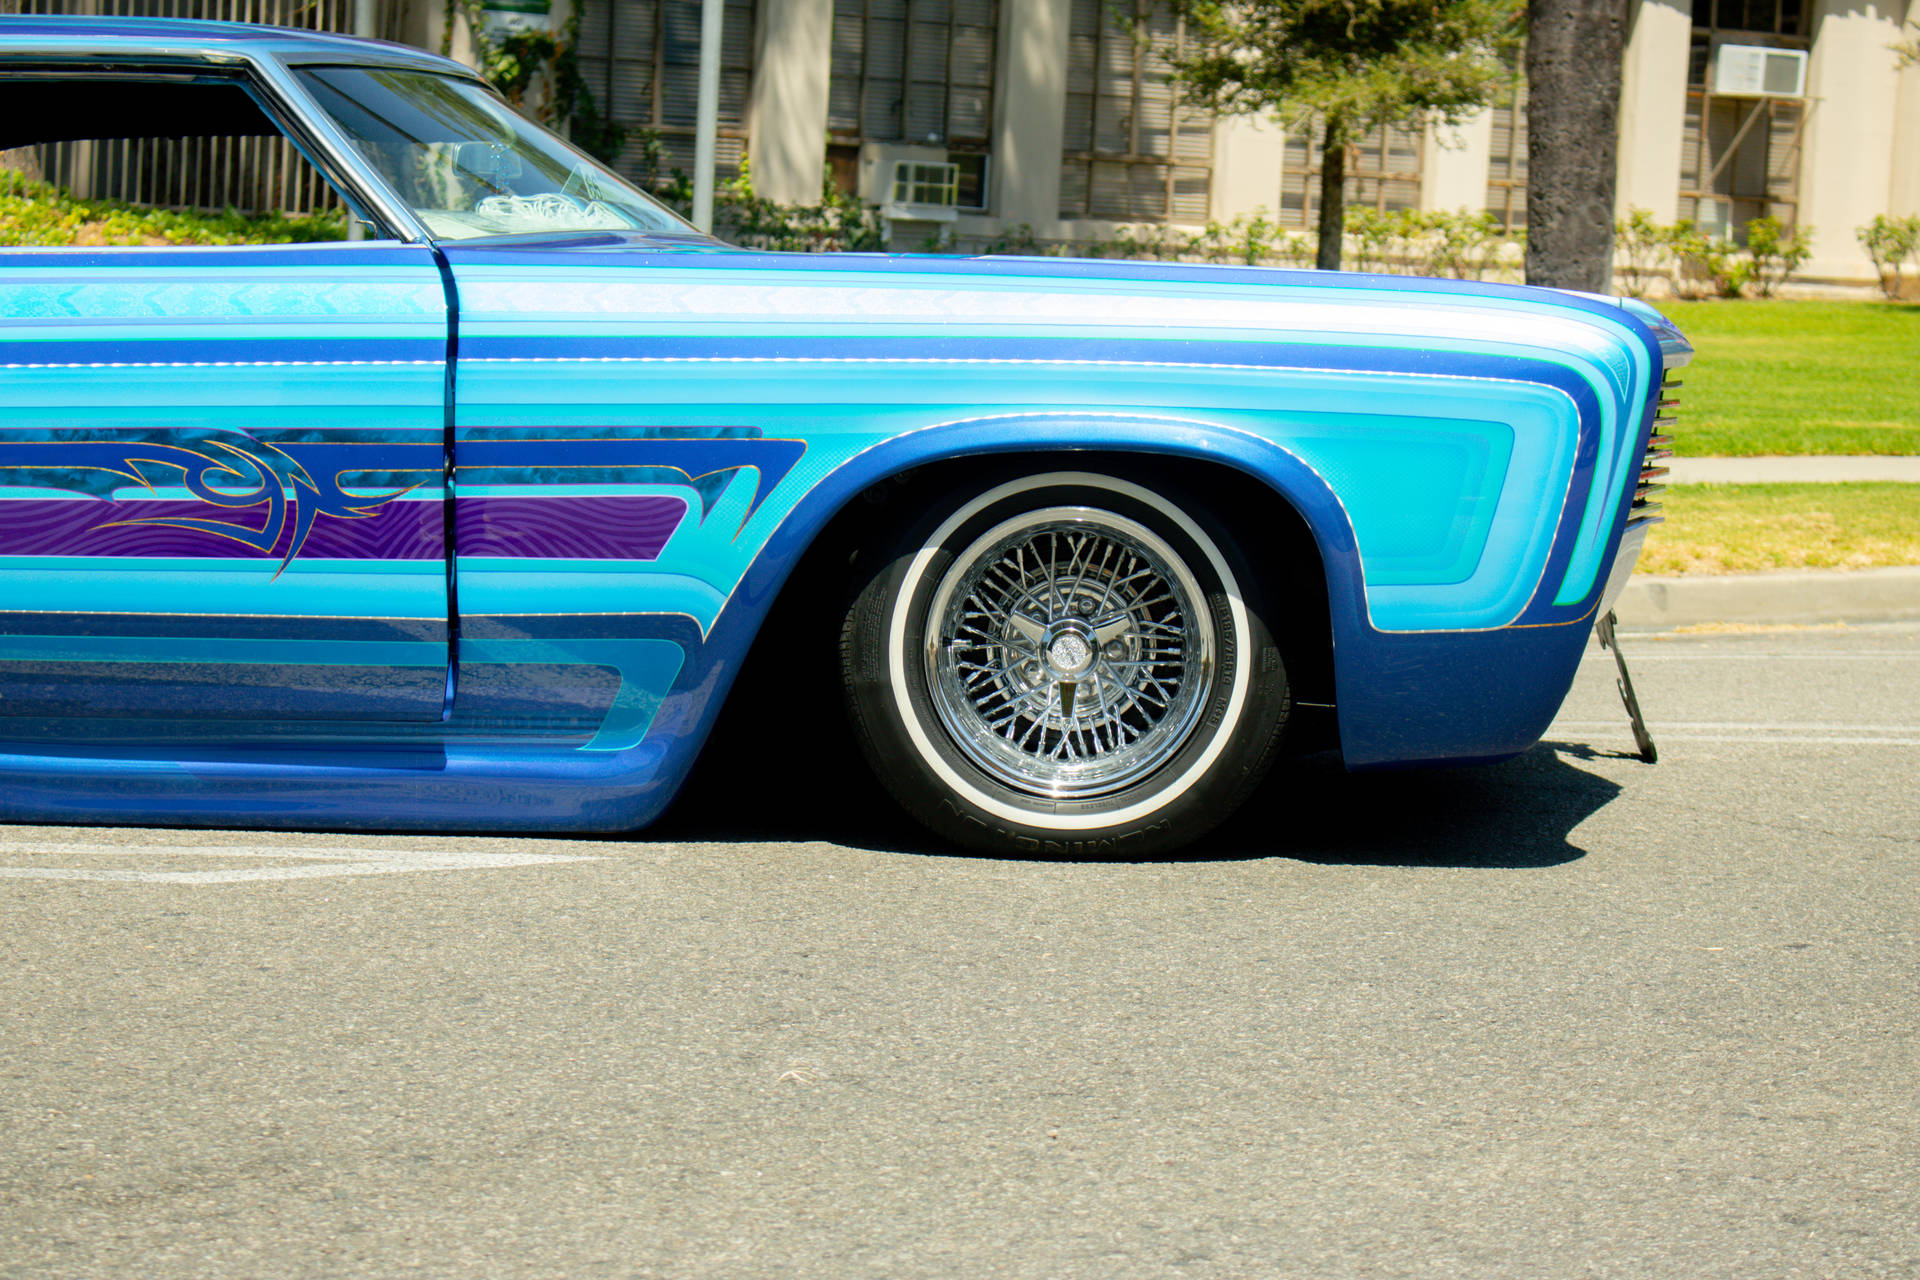 Lowrider Impala With Blue Violet Decals Background